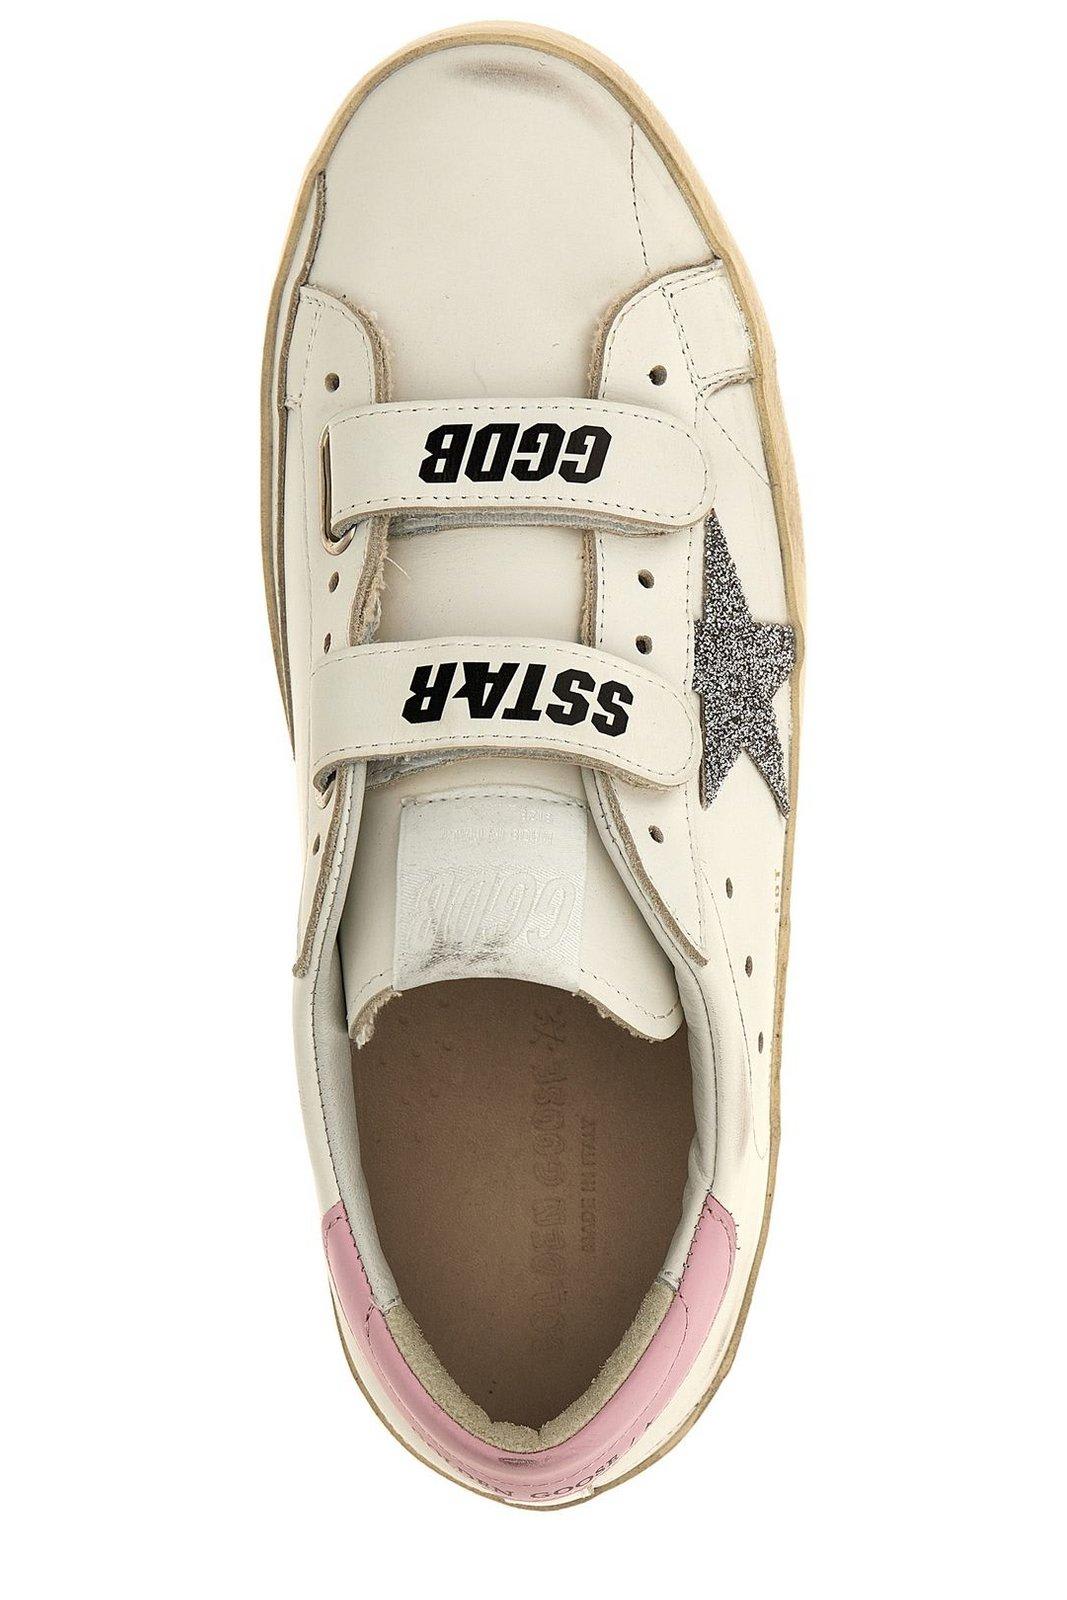 Shop Golden Goose Old School Lace-up Sneakers In White Crystal Orchid Pink